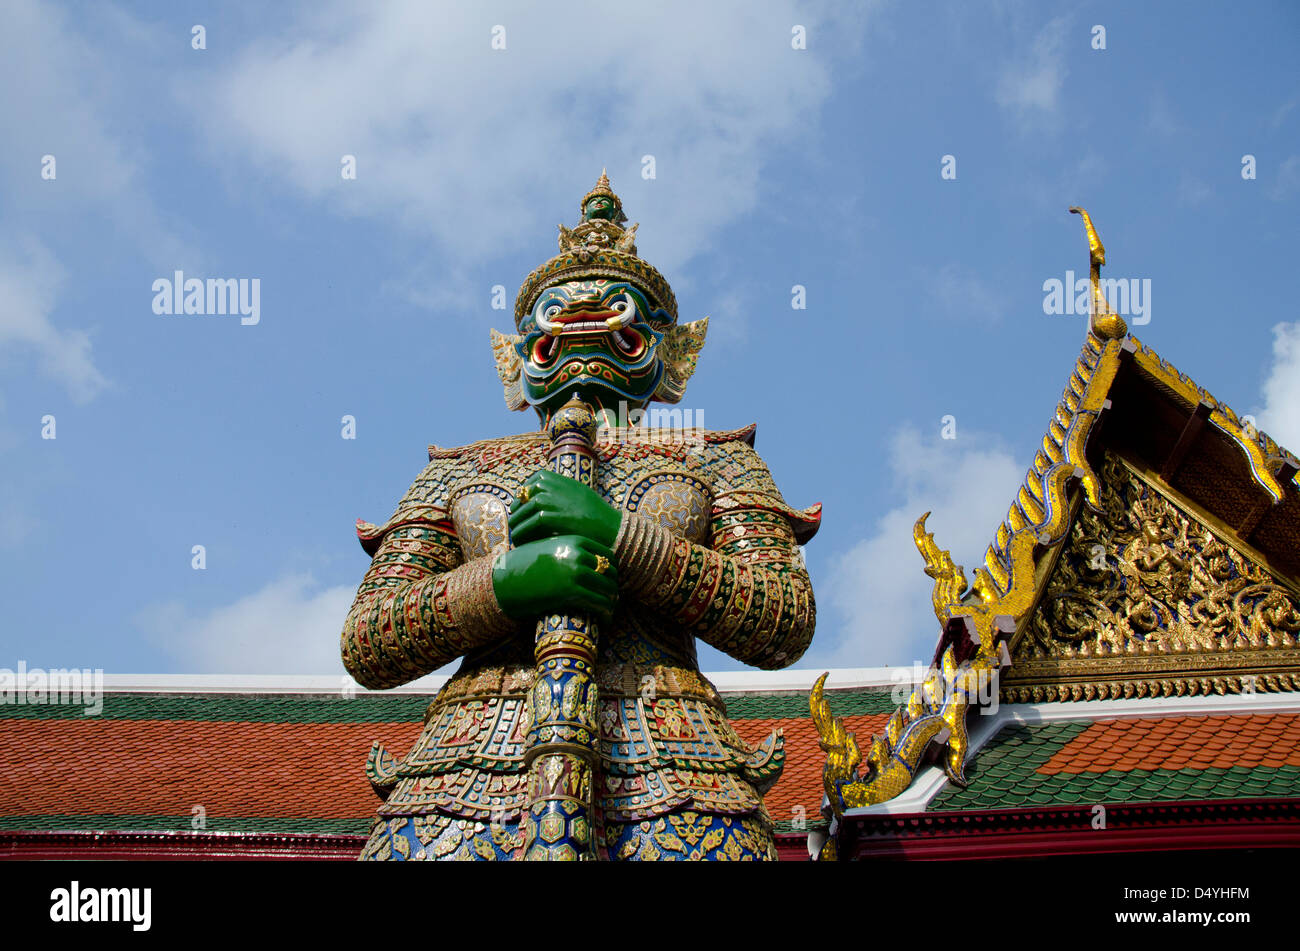 Thailand, Bangkok. The Grand Palace. The Upper Terrace monuments with mythological creature. Stock Photo